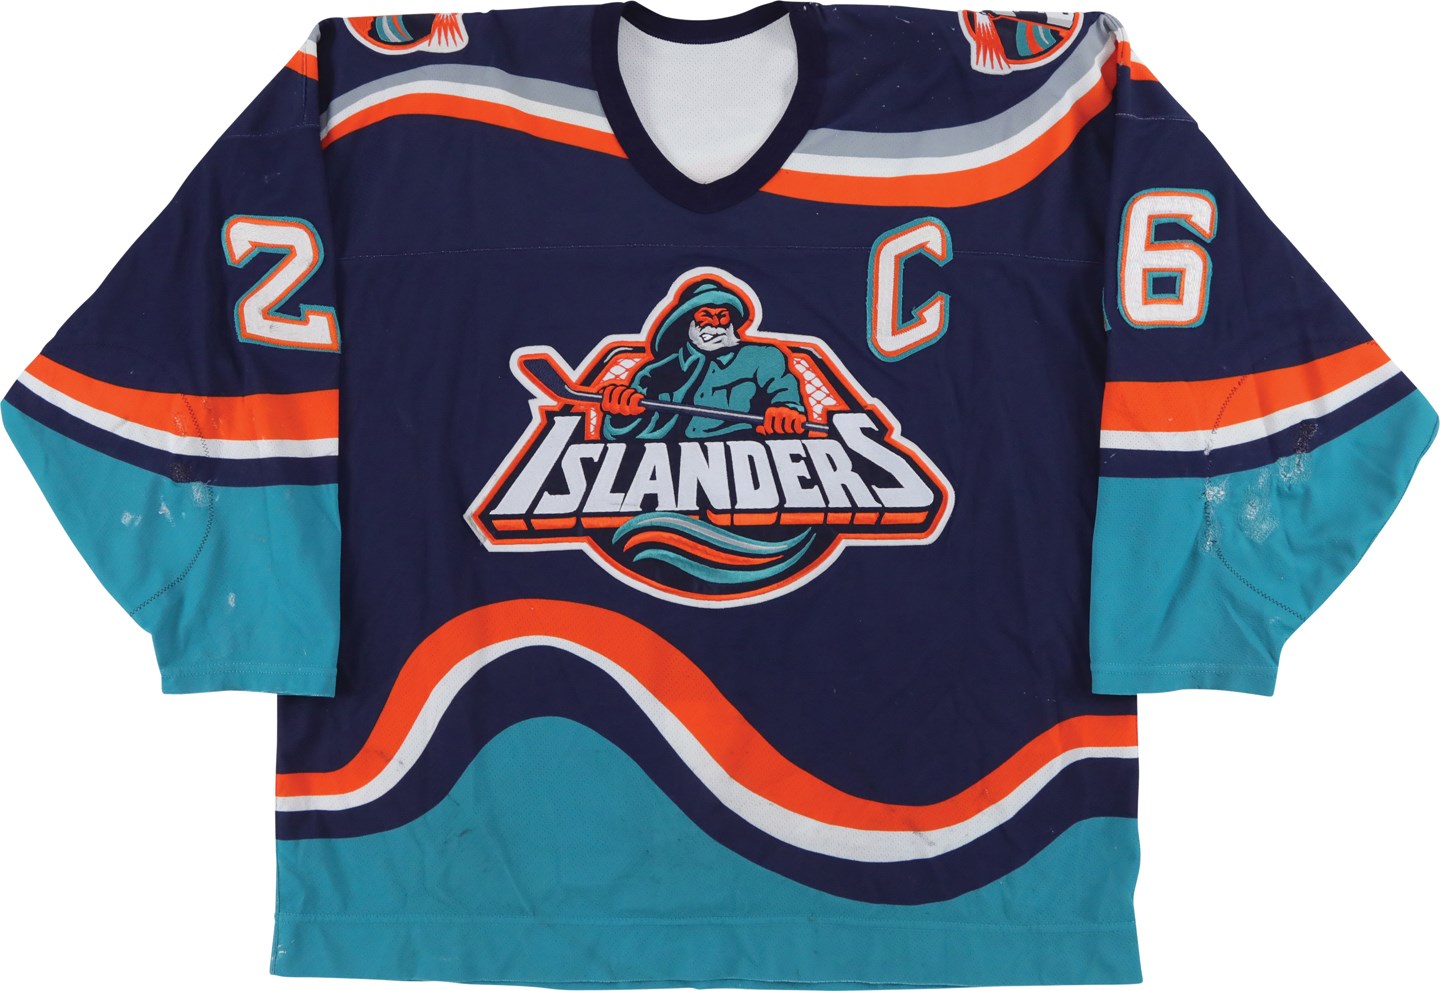 Hockey - 1995-96 Patrick Flatley New York Islanders "Fisherman" Game Worn Jersey - First Year Style and Matched to Second Game of Season! (Photo-Matched)